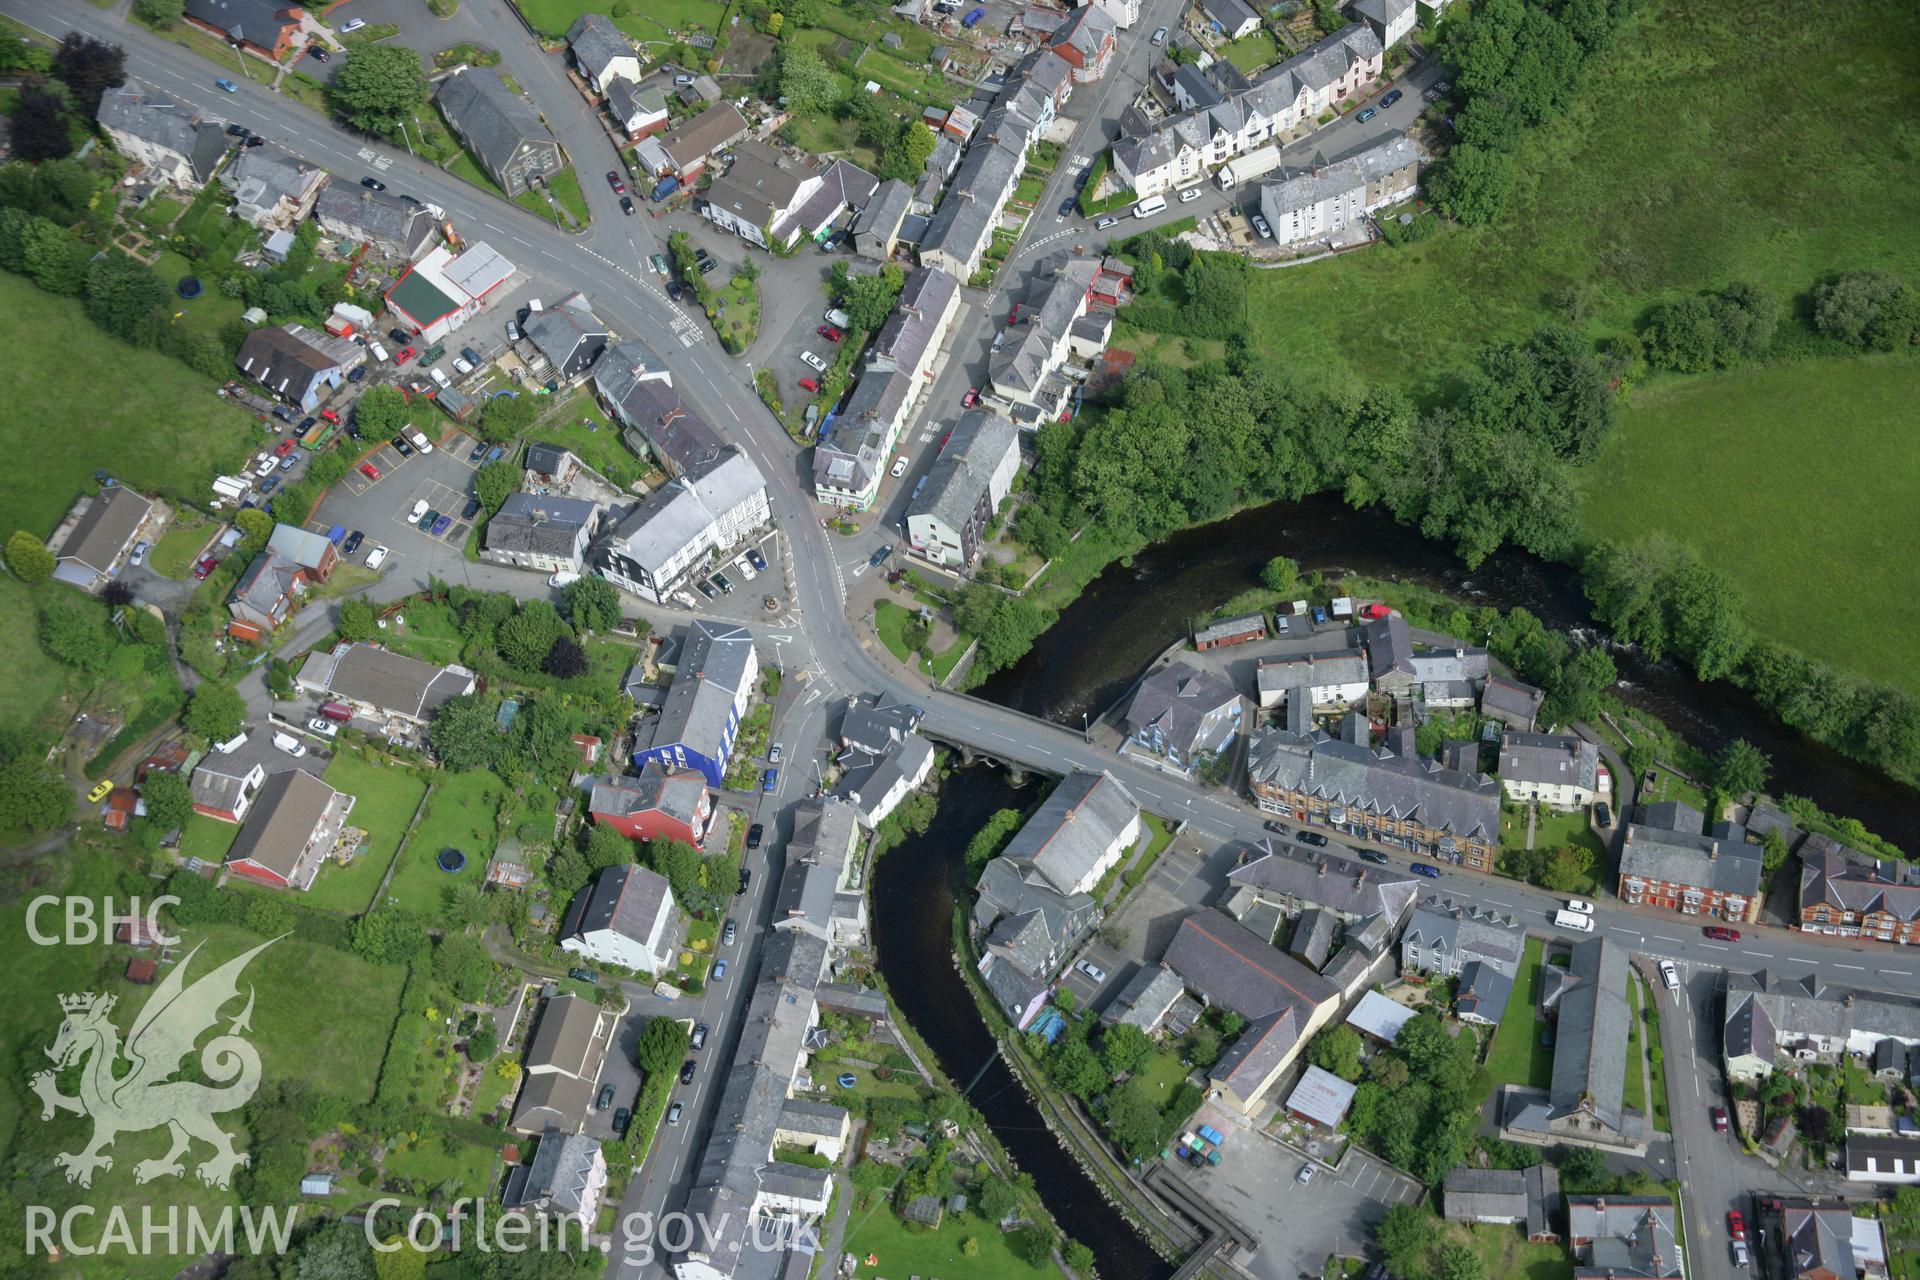 RCAHMW colour oblique aerial photograph of Llanwrtyd Wells. Taken on 09 July 2007 by Toby Driver